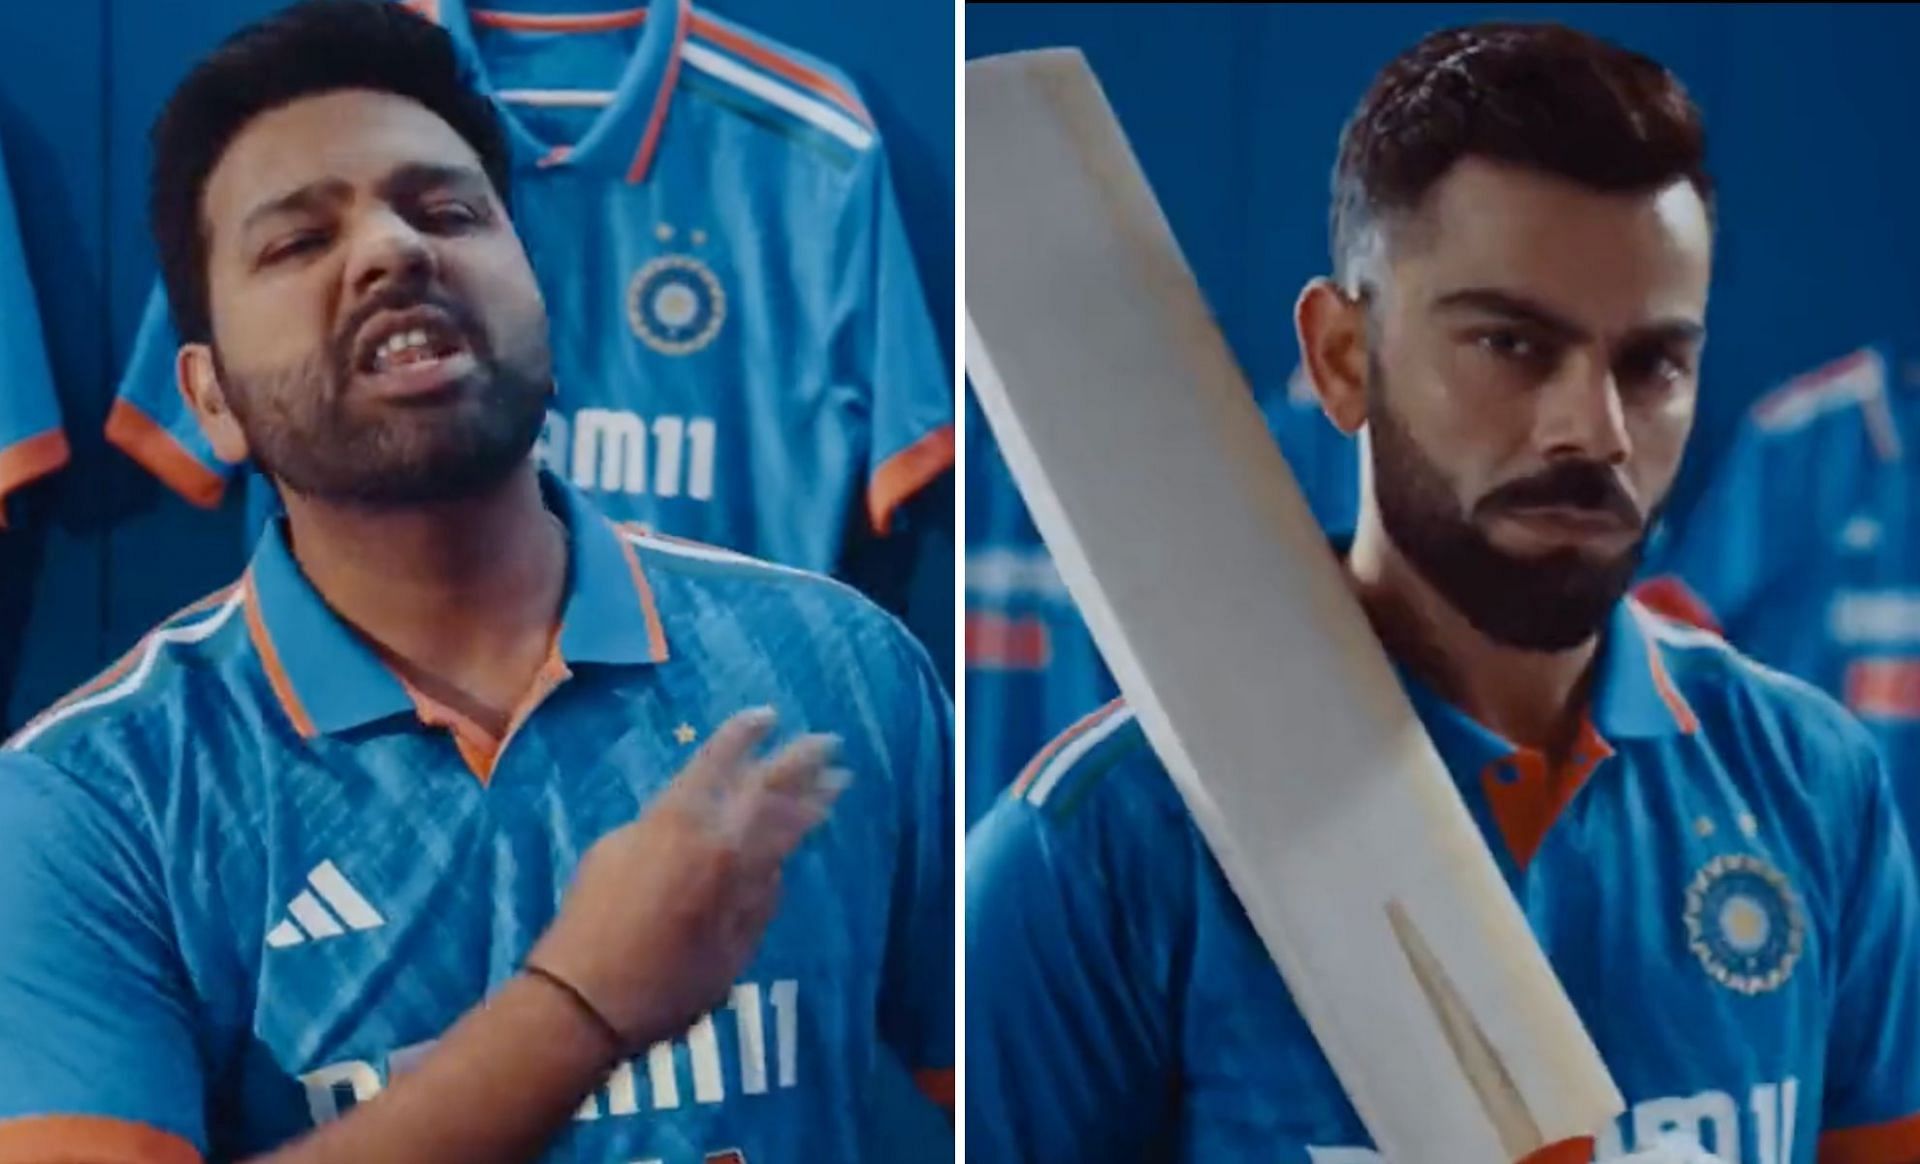 New jersey for Indian cricket team - Inside Recent